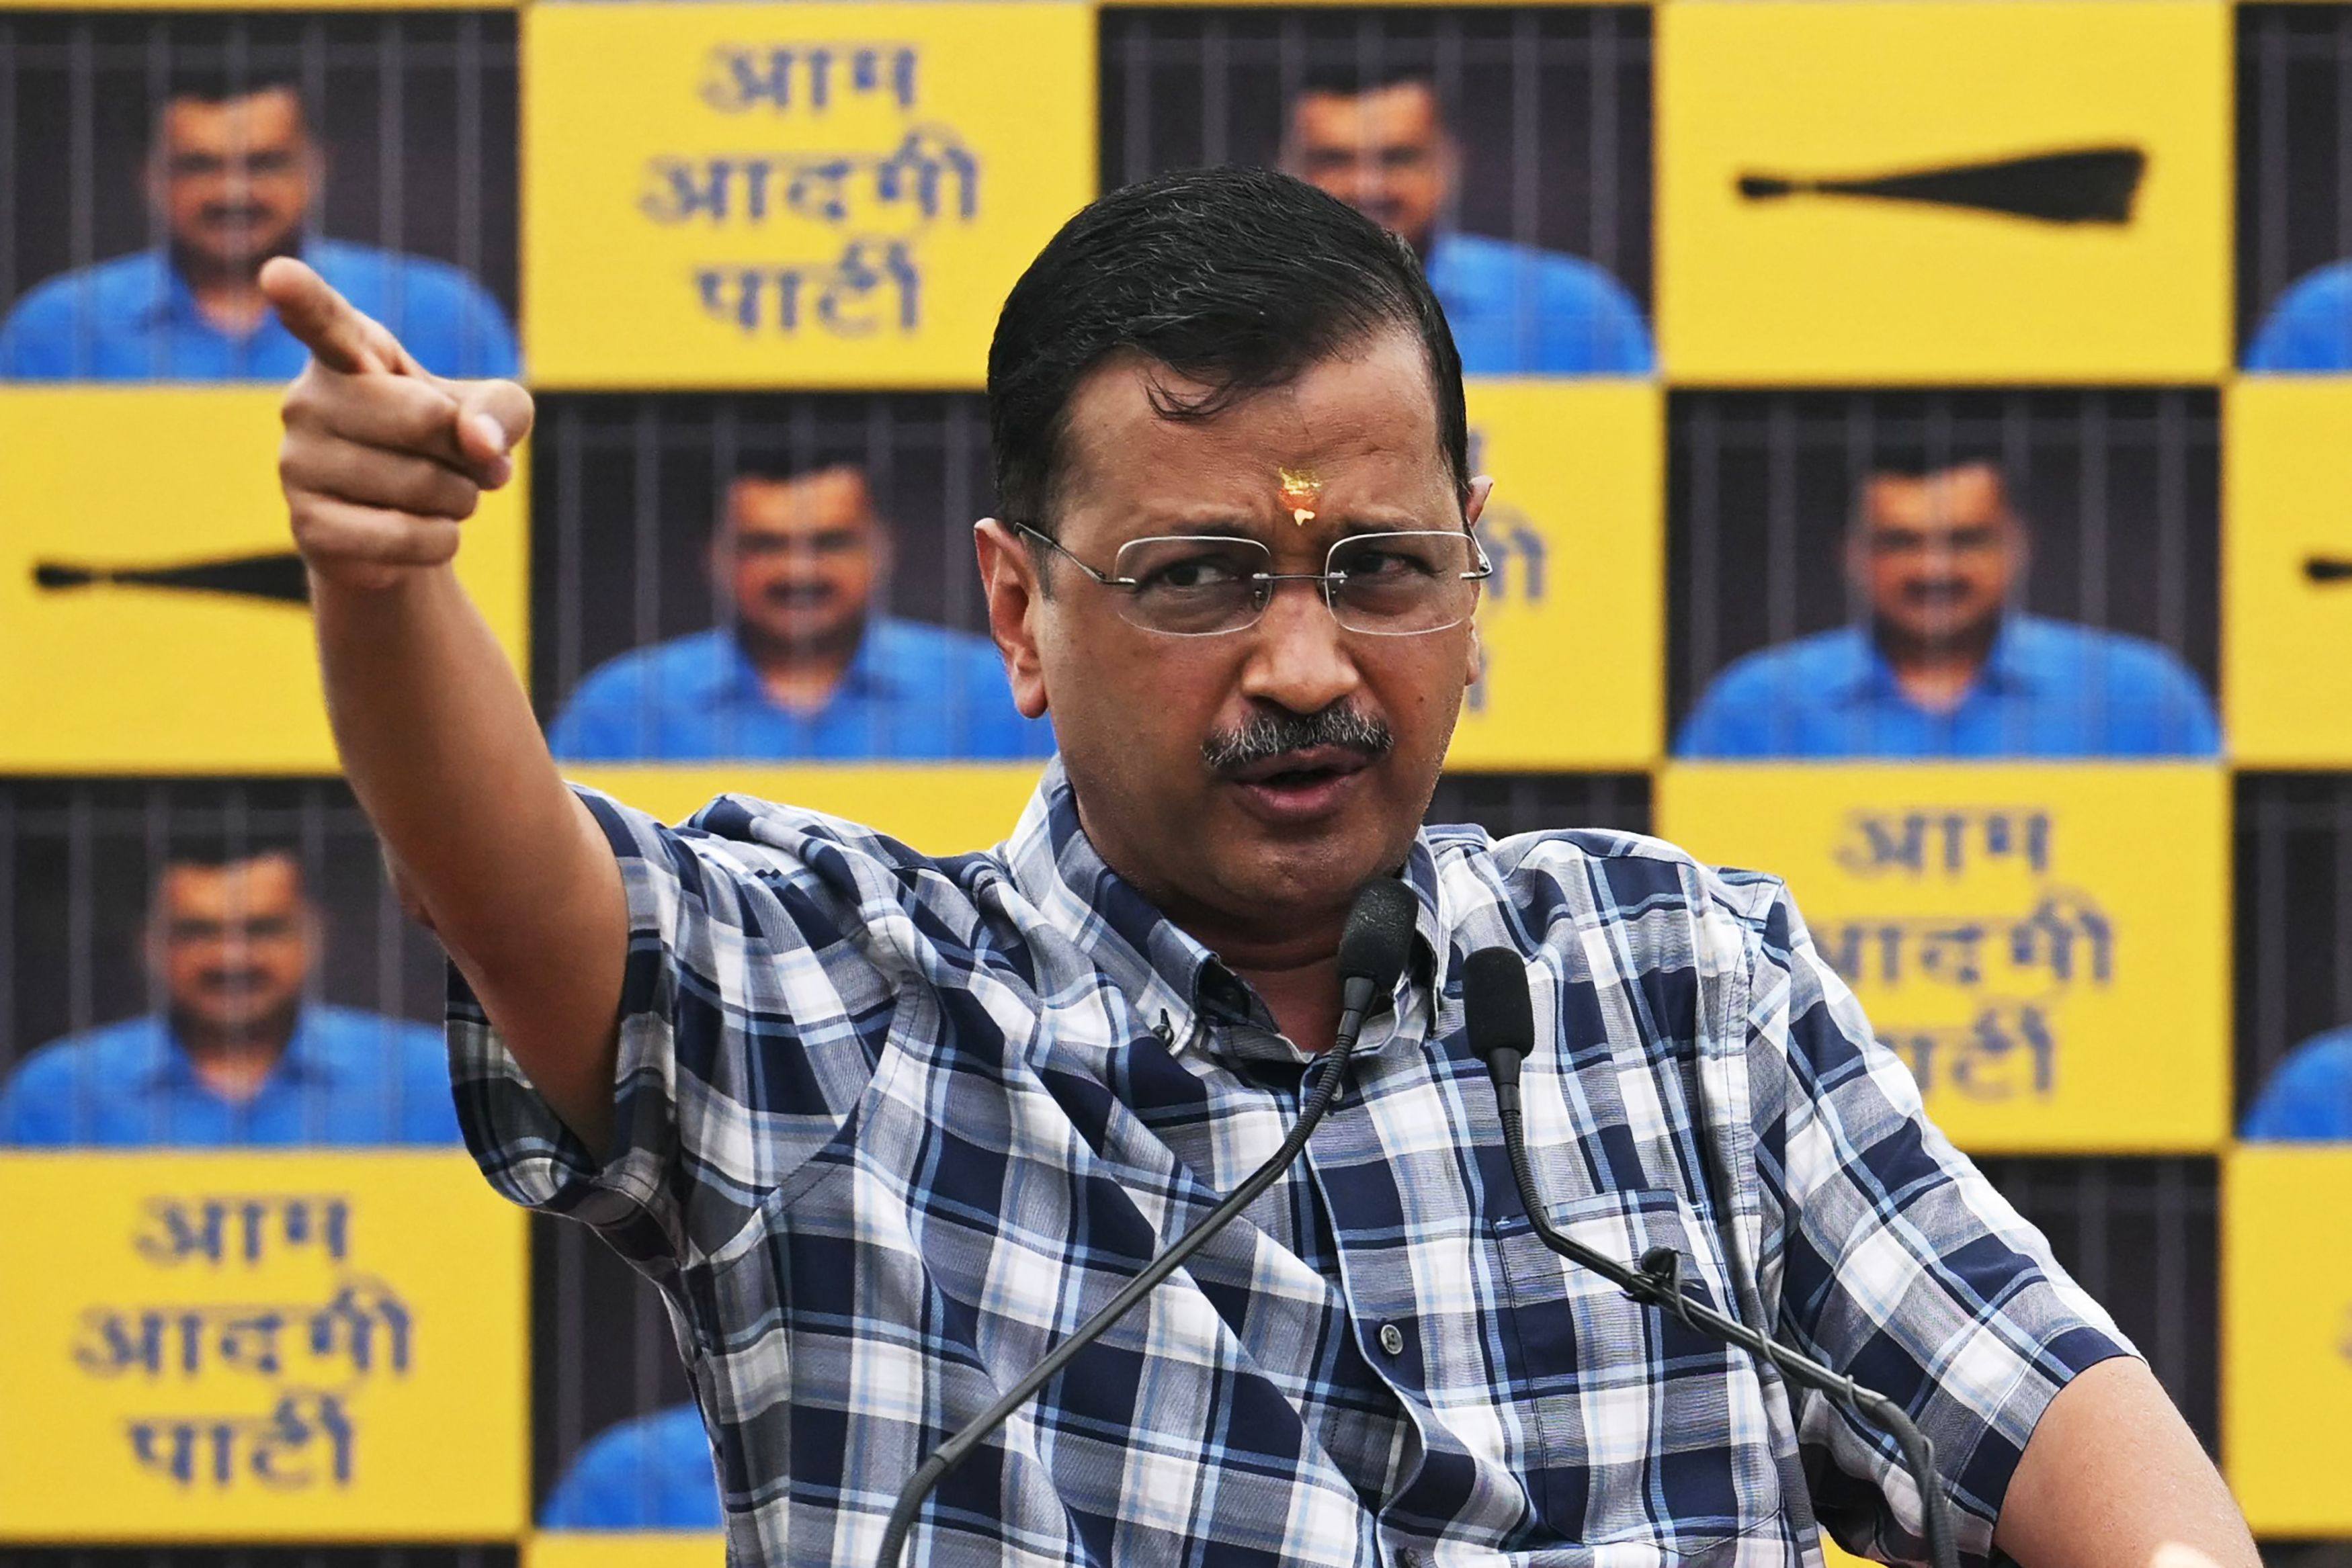 Chief Minister of Delhi Arvind Kejriwal during a press conference in New Delhi on Saturday, a day after being released on bail by India’s top court. Photo: AFP